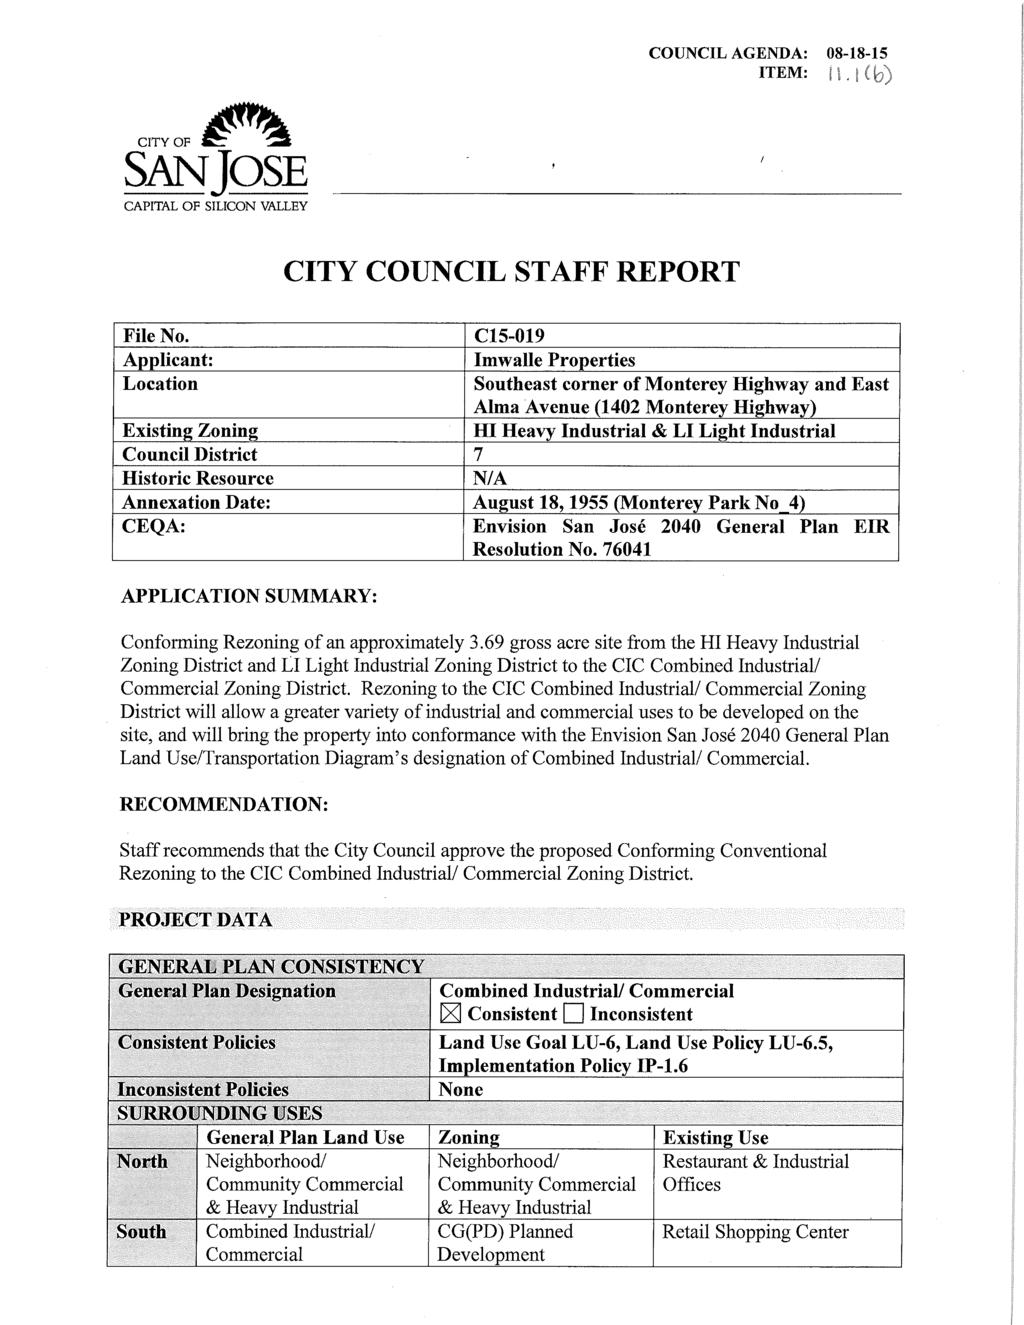 COUNCIL AGENDA: 08-18-15 ITEM: II. ((b) CITY OF Cr ^2 SAN JOSE CAPITAL OF SILICON VALLEY CITY COUNCIL STAFF REPORT File No.